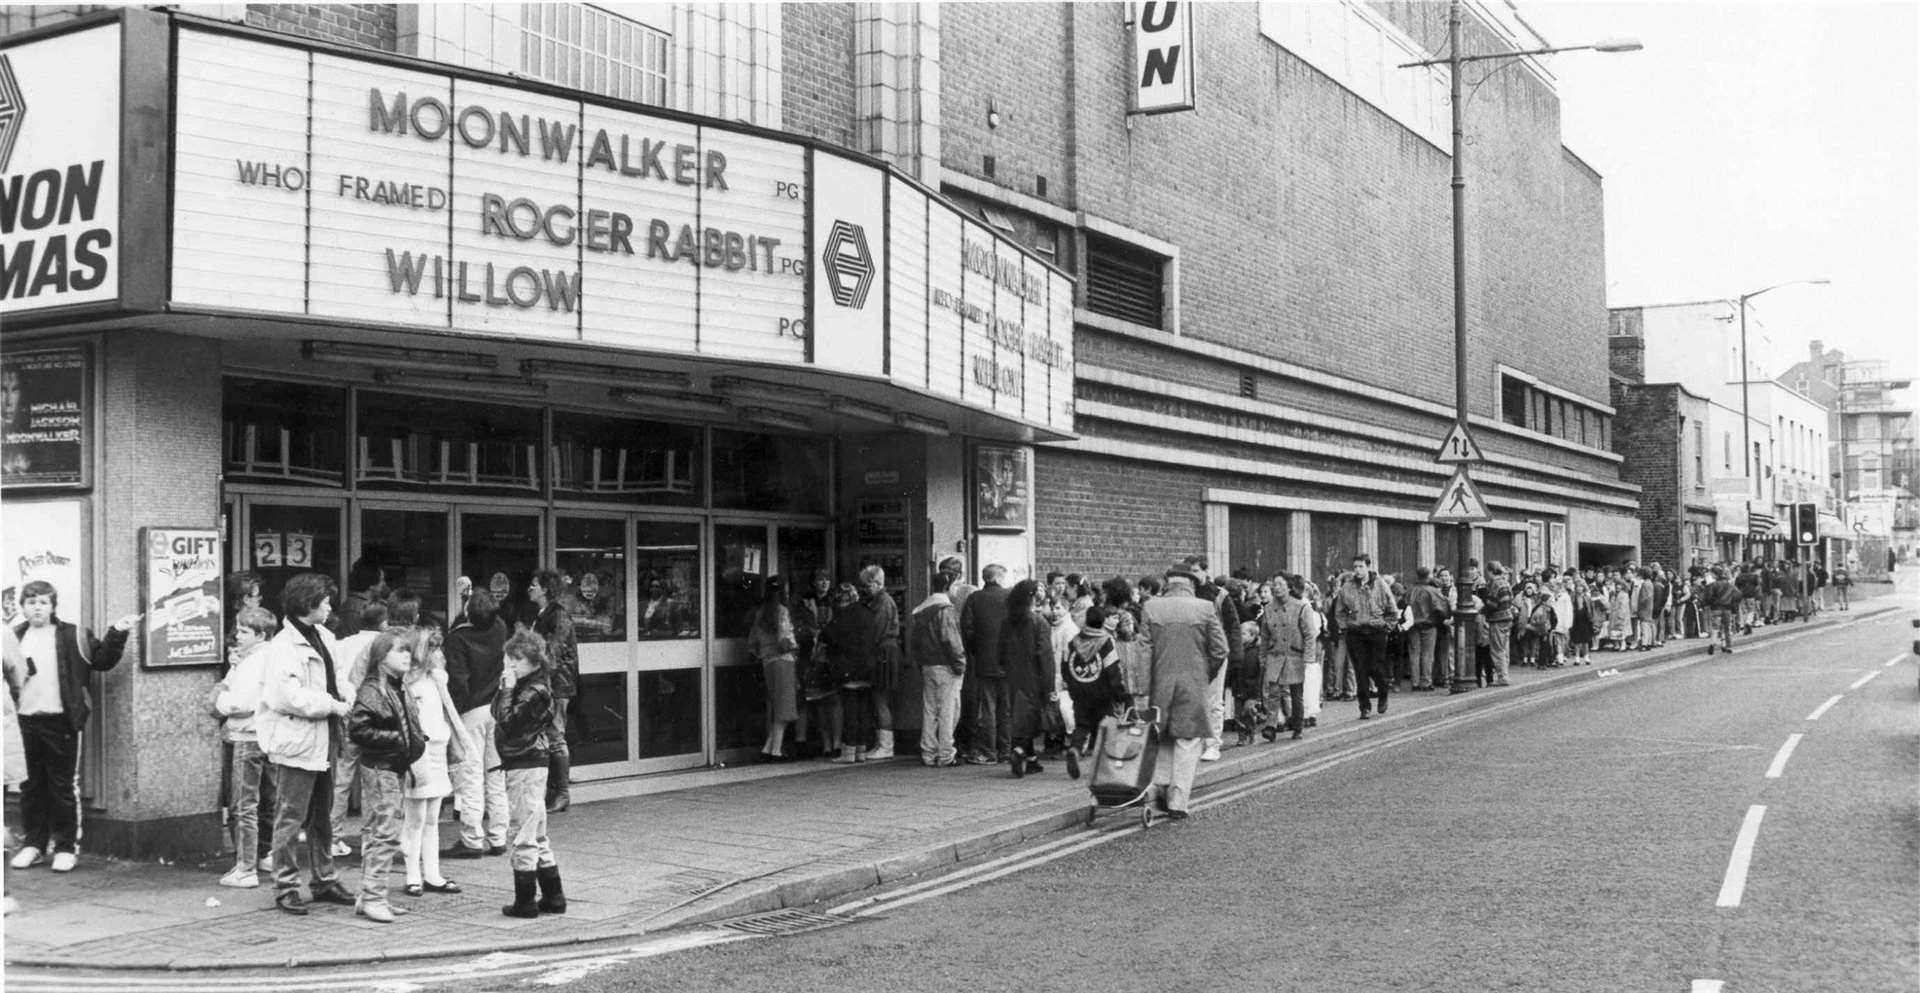 Long queues outside the Cannon Cinema in Chatham High Street were once typical, as this 1989 photograph shows. The cinema, at the corner of Upbury Way, became the ABC by the 1990s but the lure of modern multiplexes sealed its fate. When it closed 2002 only 69 people turned up to see the last film, despite it being the blockbuster Lord of the Rings